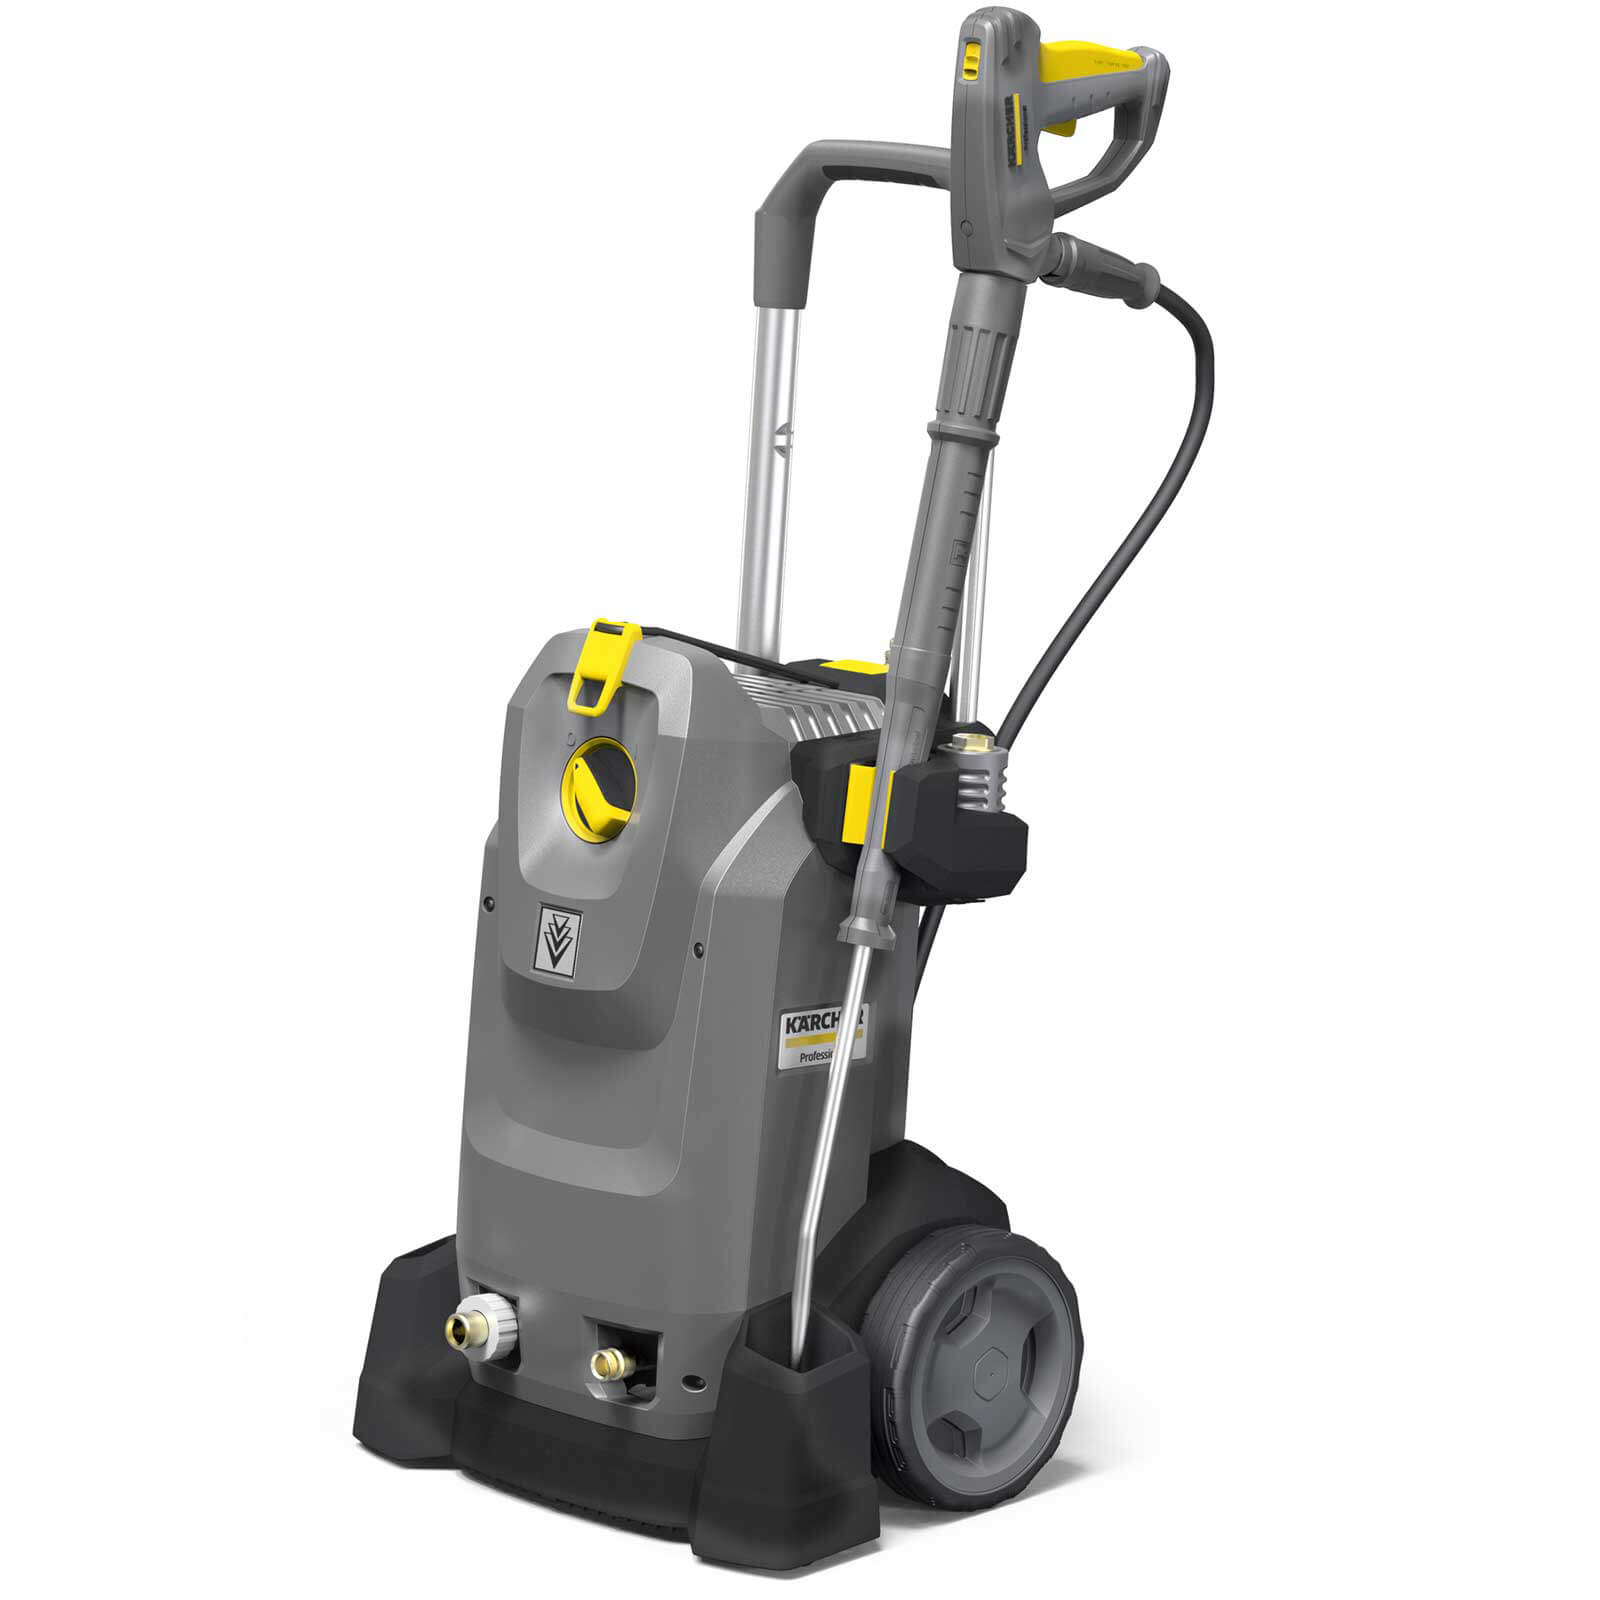 Photos - Other household chemicals Karcher HD 6/11-4 M PLUS Professional Pressure Washer 110 Bar 110v 